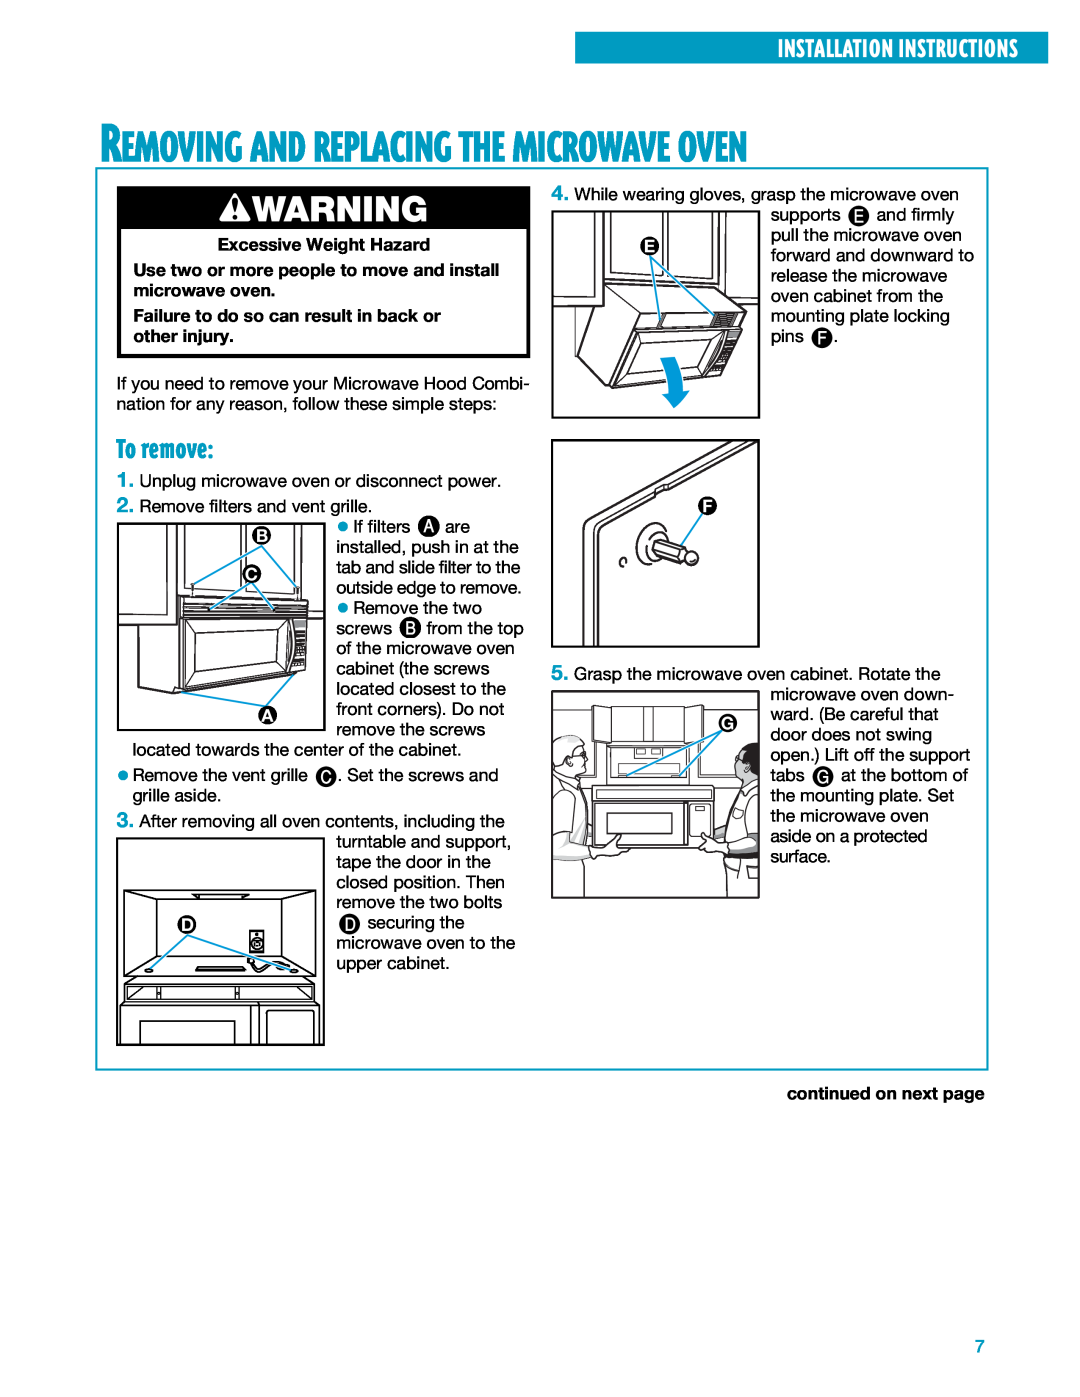 Whirlpool YMH7140XF To remove, Installation Instructions, Excessive Weight Hazard, wWARNING, continued on next page 